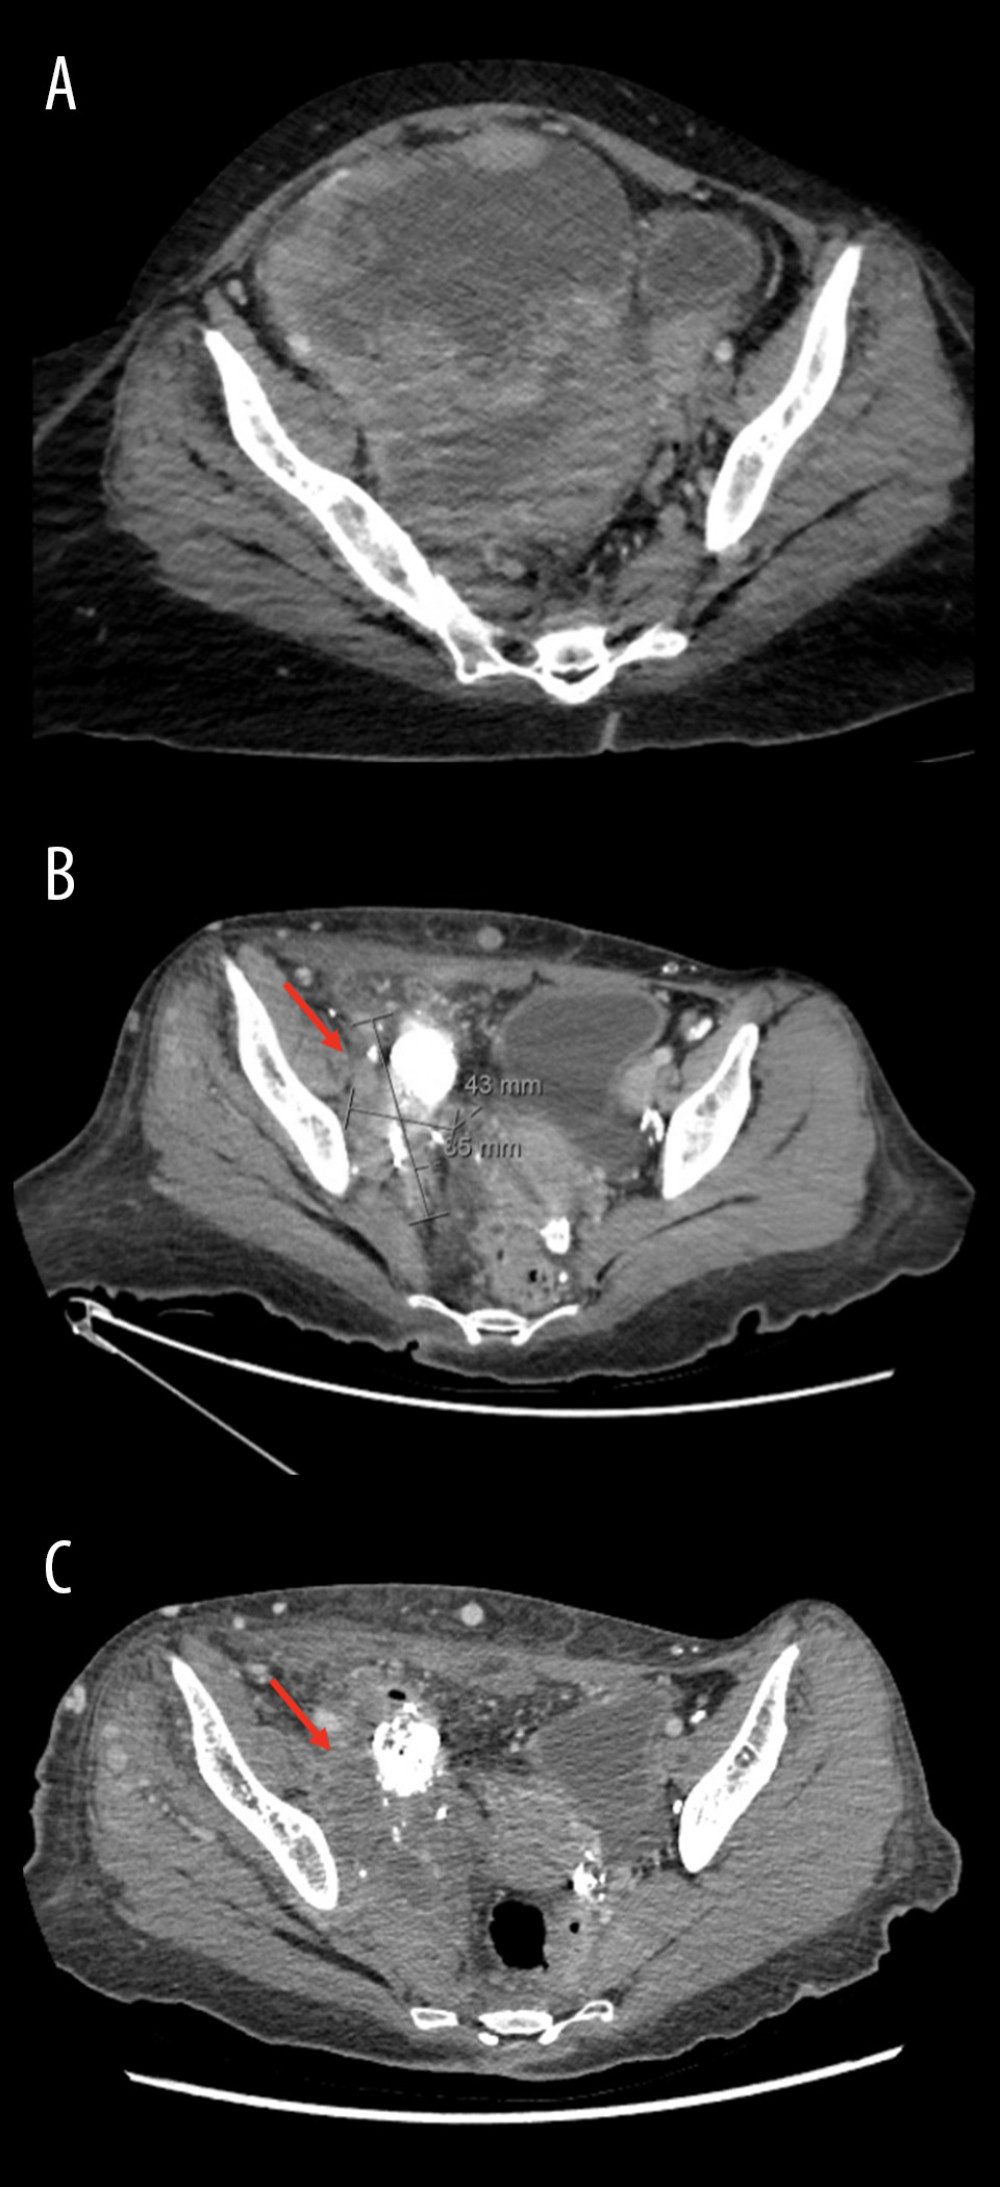 Axial computed tomography revealing a large malignant pelvic mass (arrows) before surgery at presentation (A), after surgery (B), and after pazopanib (C).